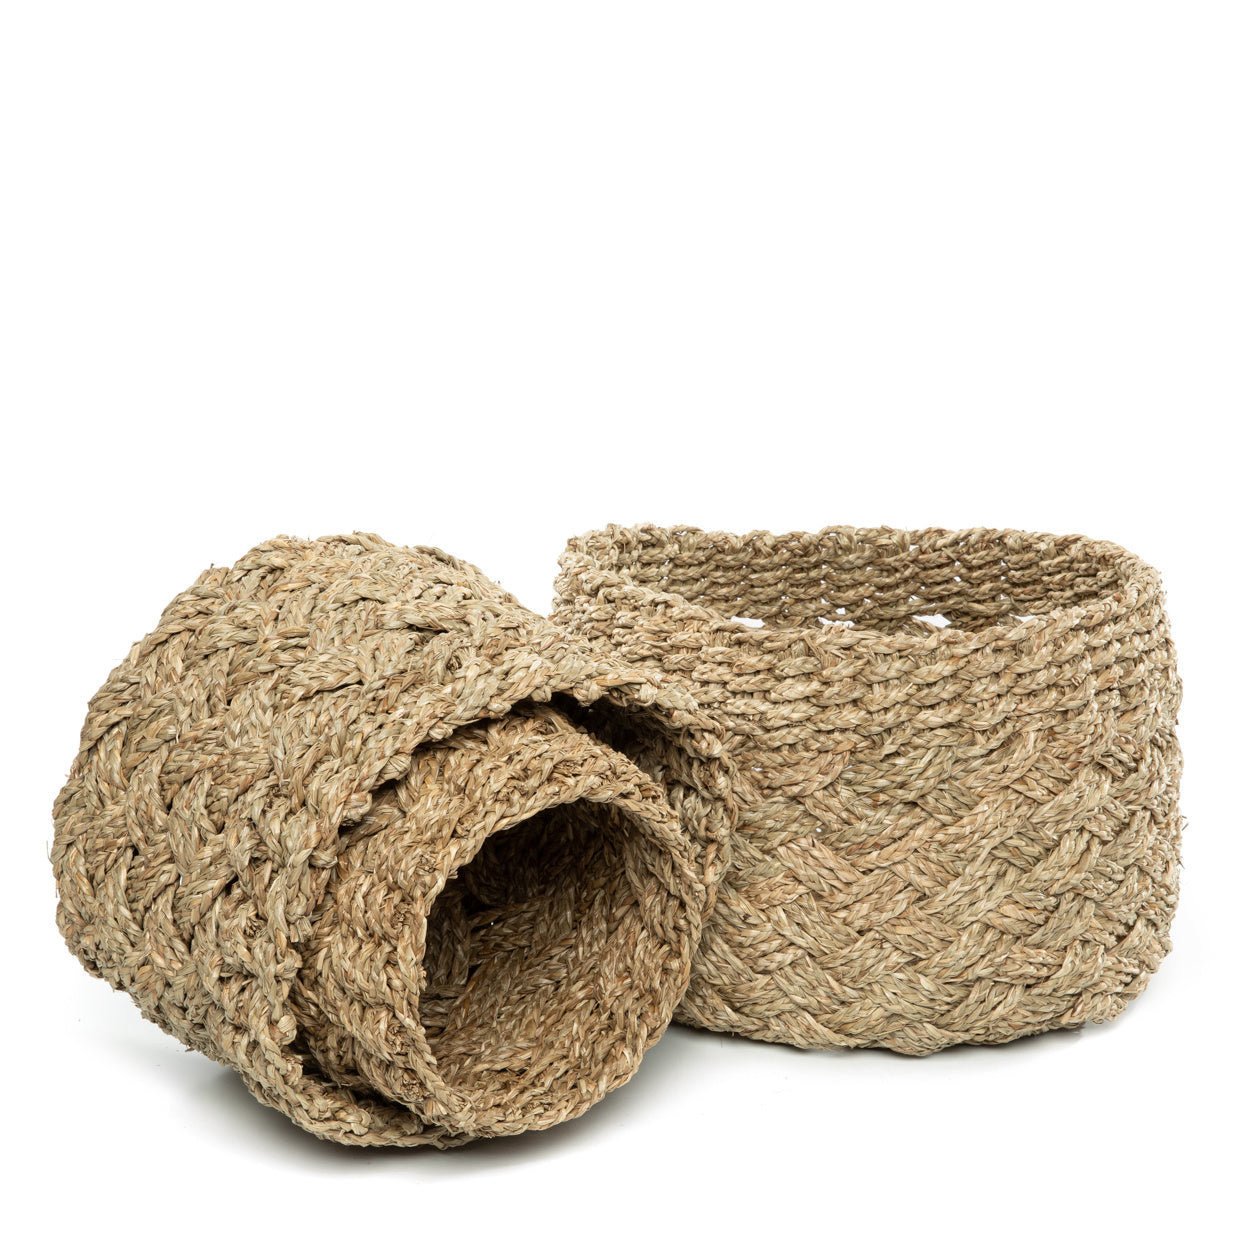 THE CAT BA Baskets Set of 3 half-folded front view